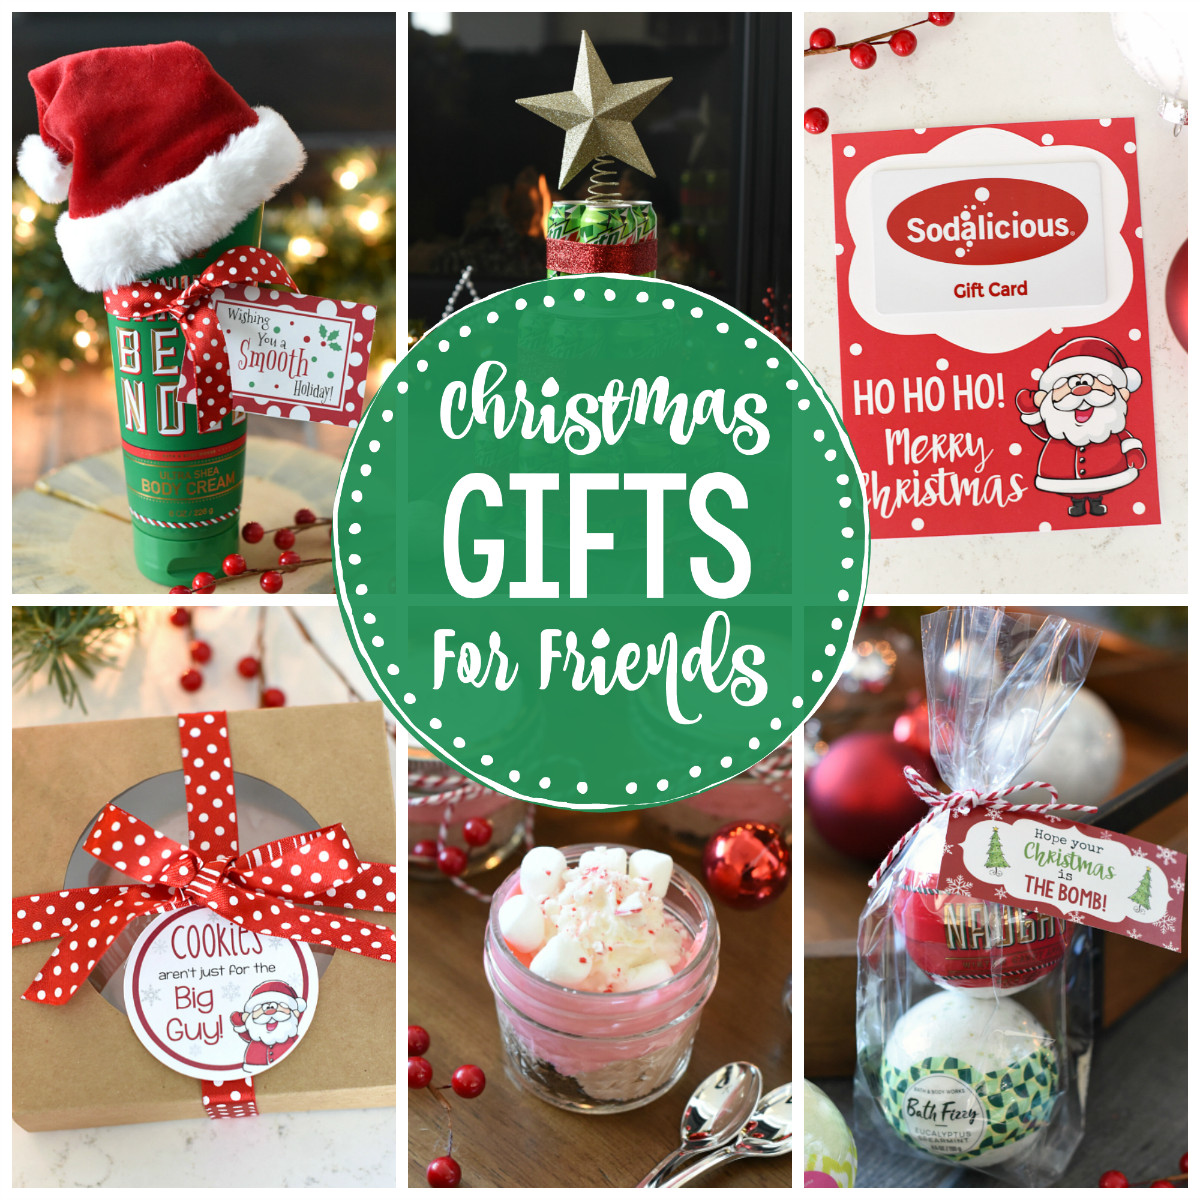 Holiday Gift Ideas For Friends
 Good Gifts for Friends at Christmas – Fun Squared